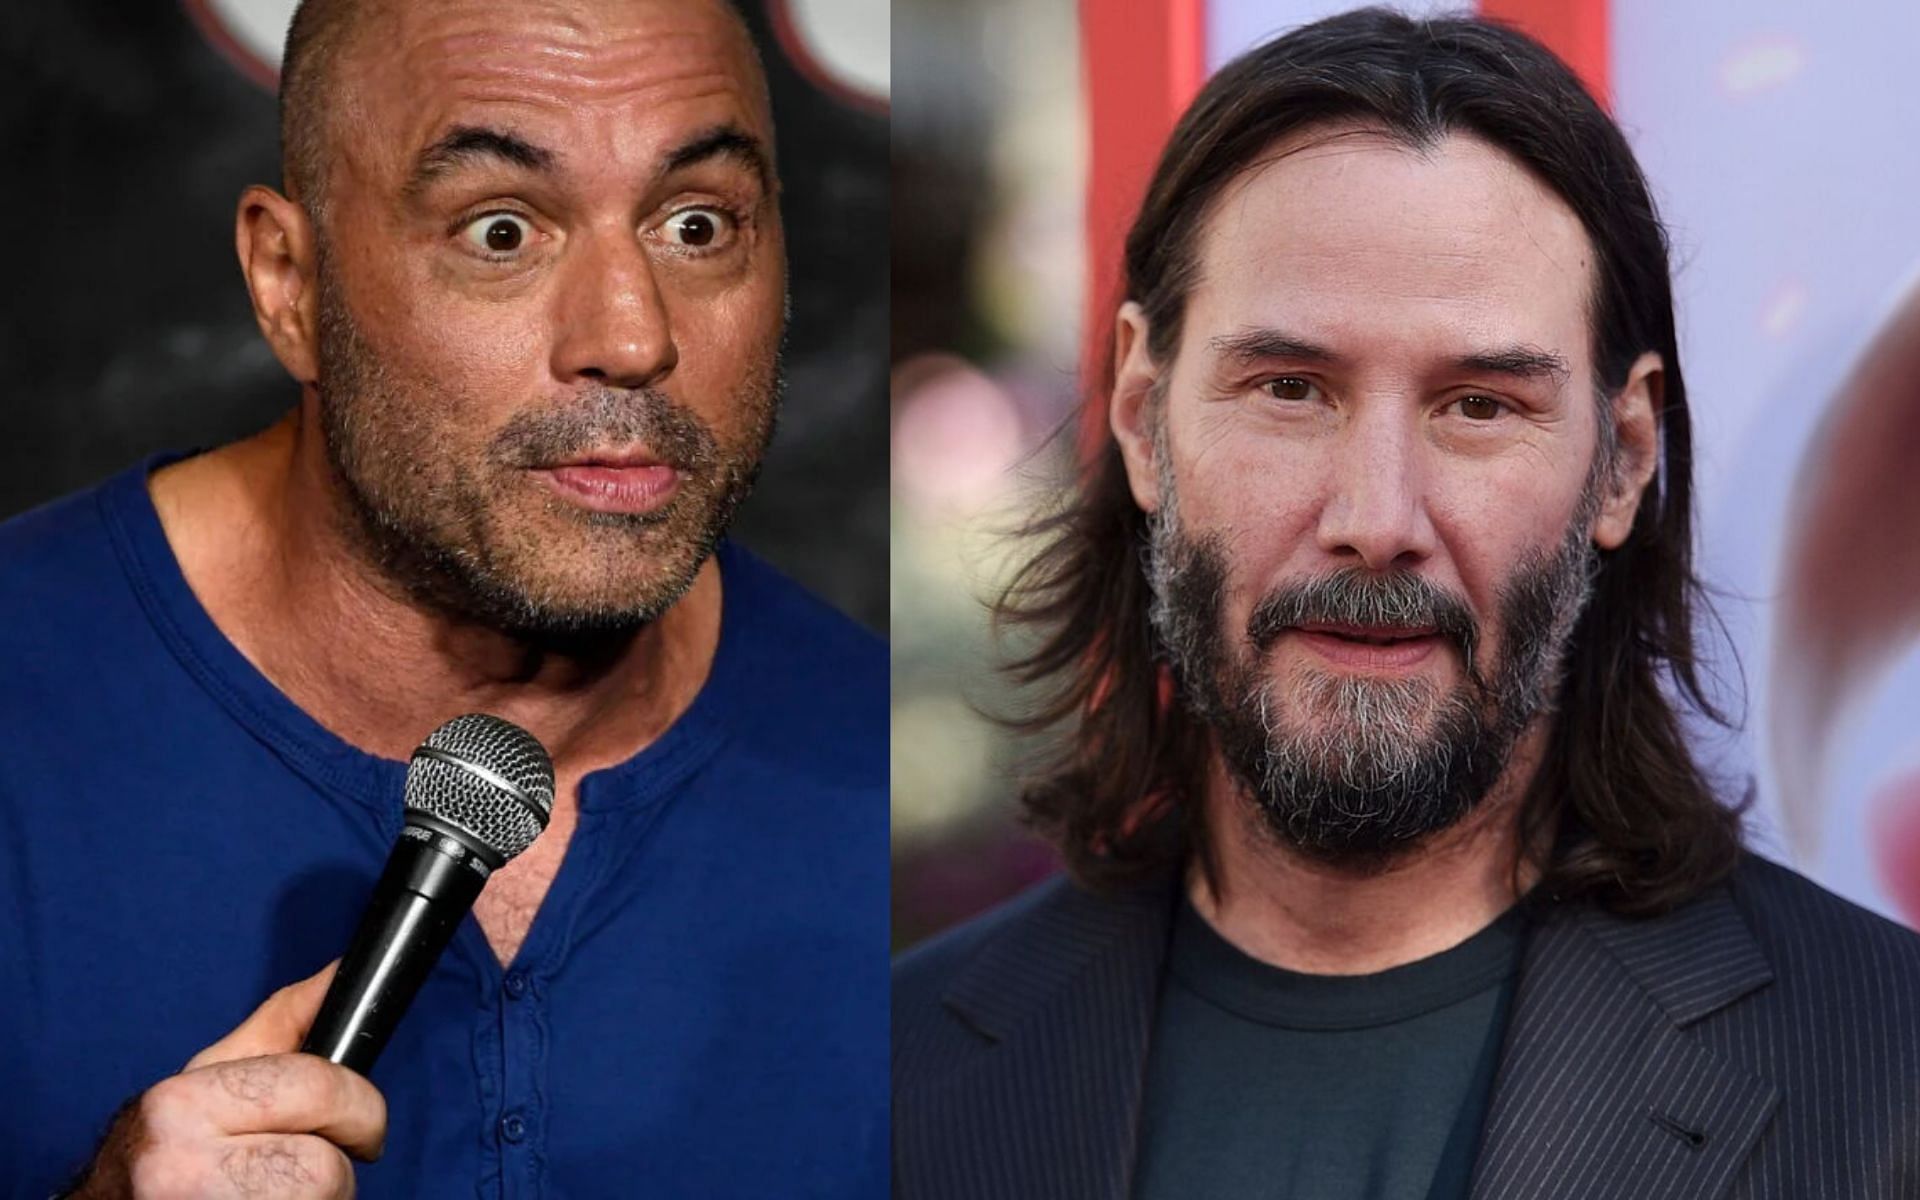 Joe Rogan (left) and Keanu Reeves (right). [Images courtesy: left image from WireImage and right image from AP]